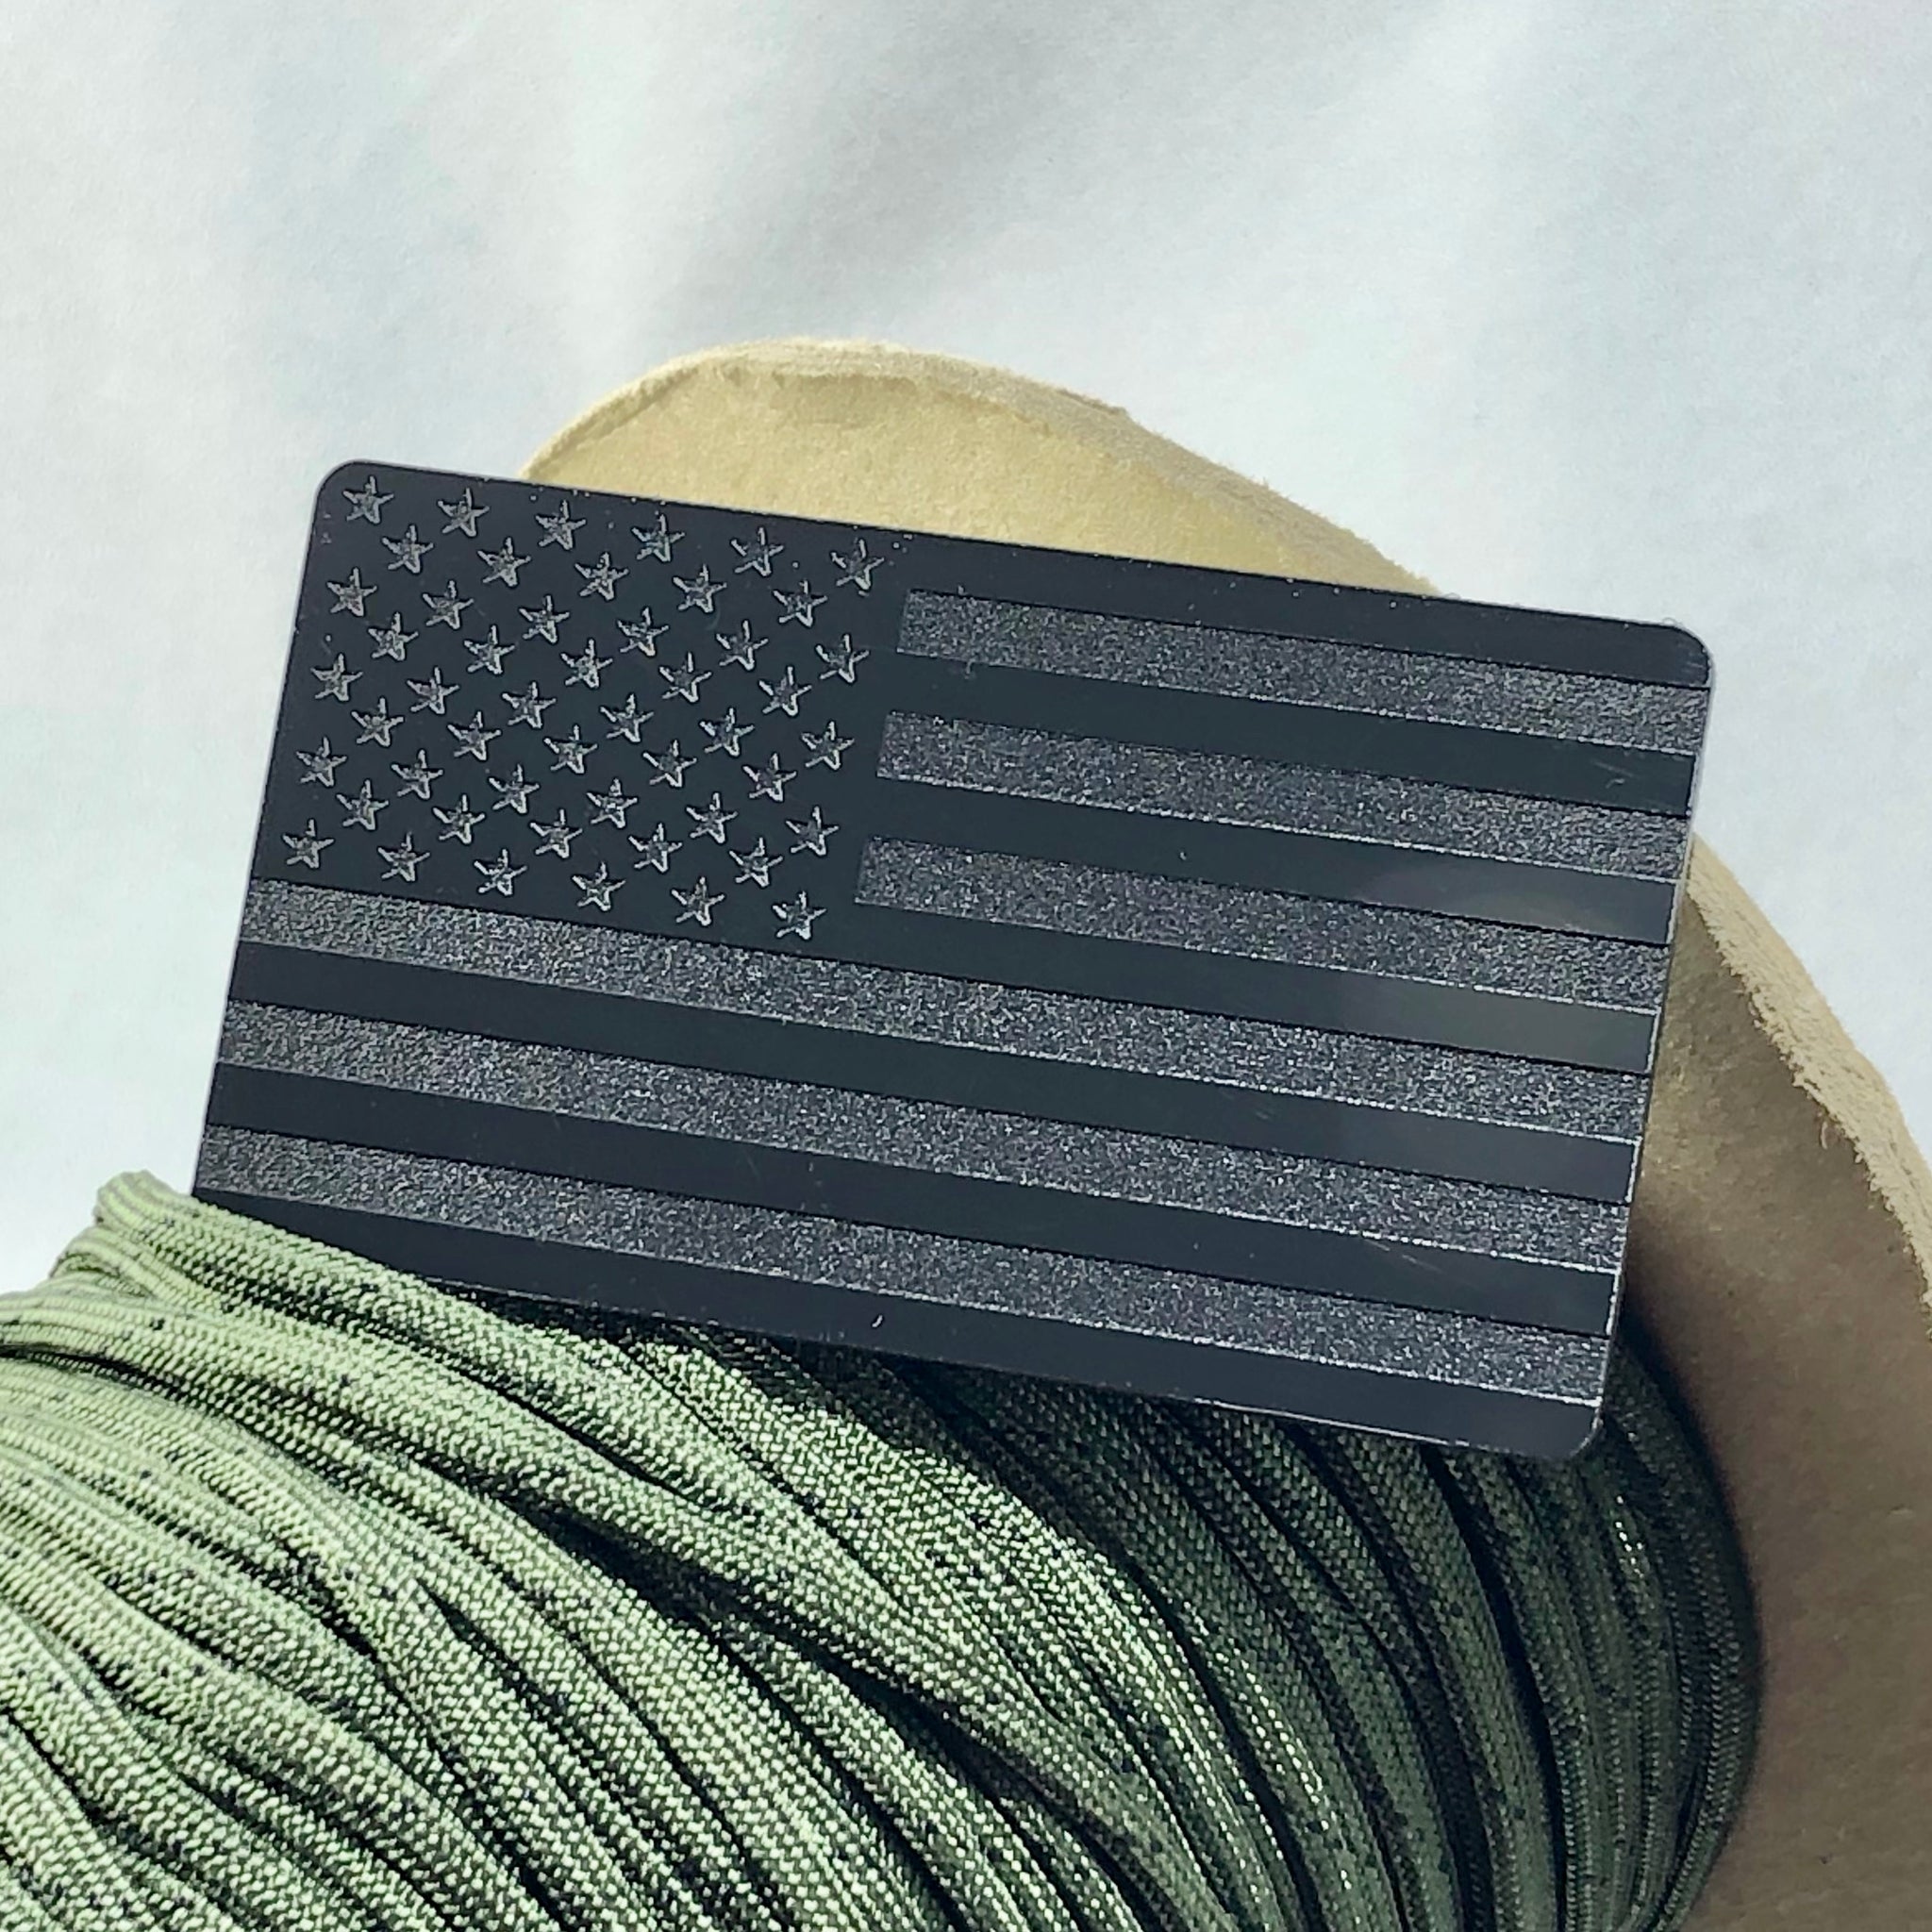 American Flag - Premium Morale Patches - Say Again Over